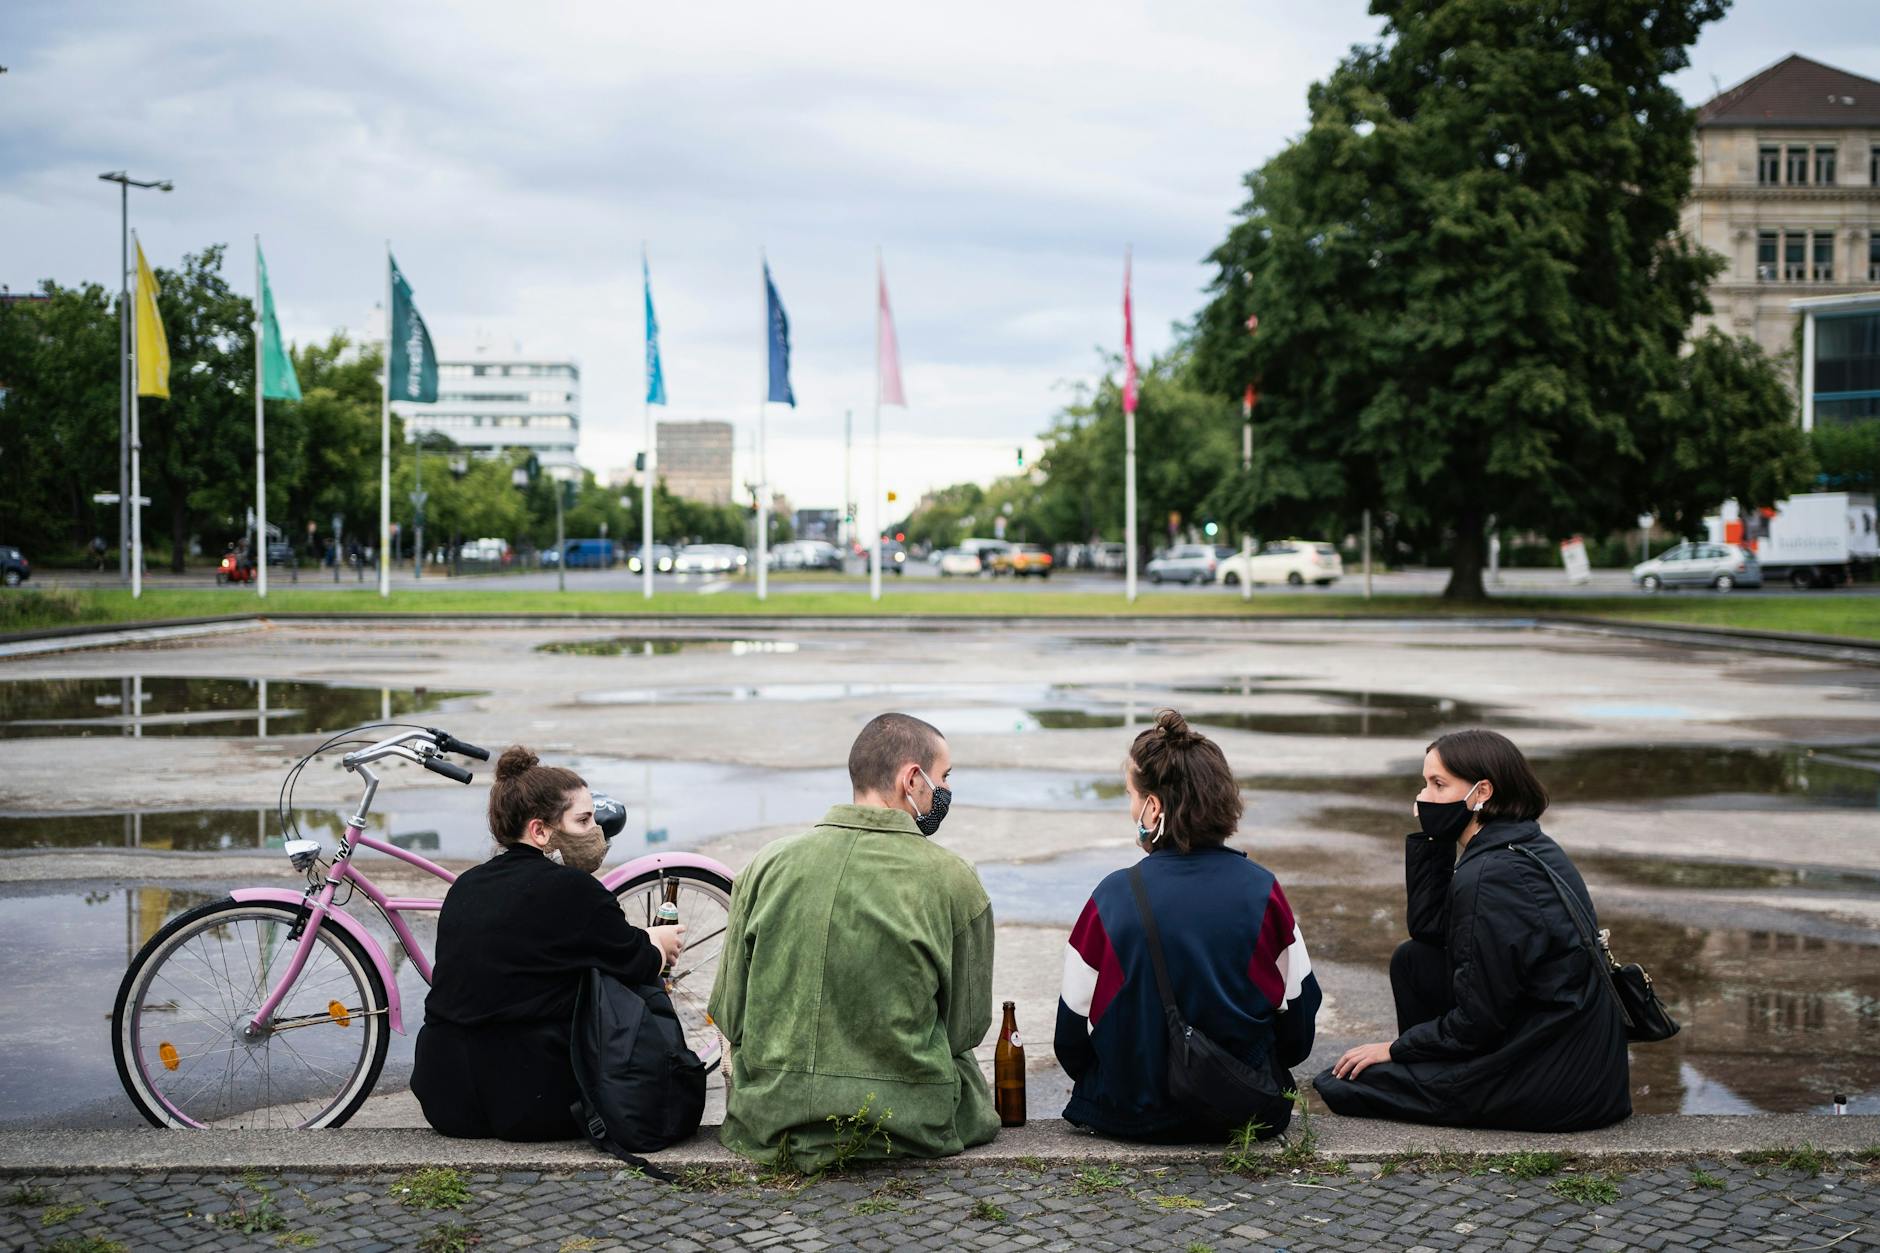 Visitors to the alternative tour of the UDK "art space city" sit on the central island of Ernst-Reuter-Platz.  Berlin, Germany, 07/16/2020.